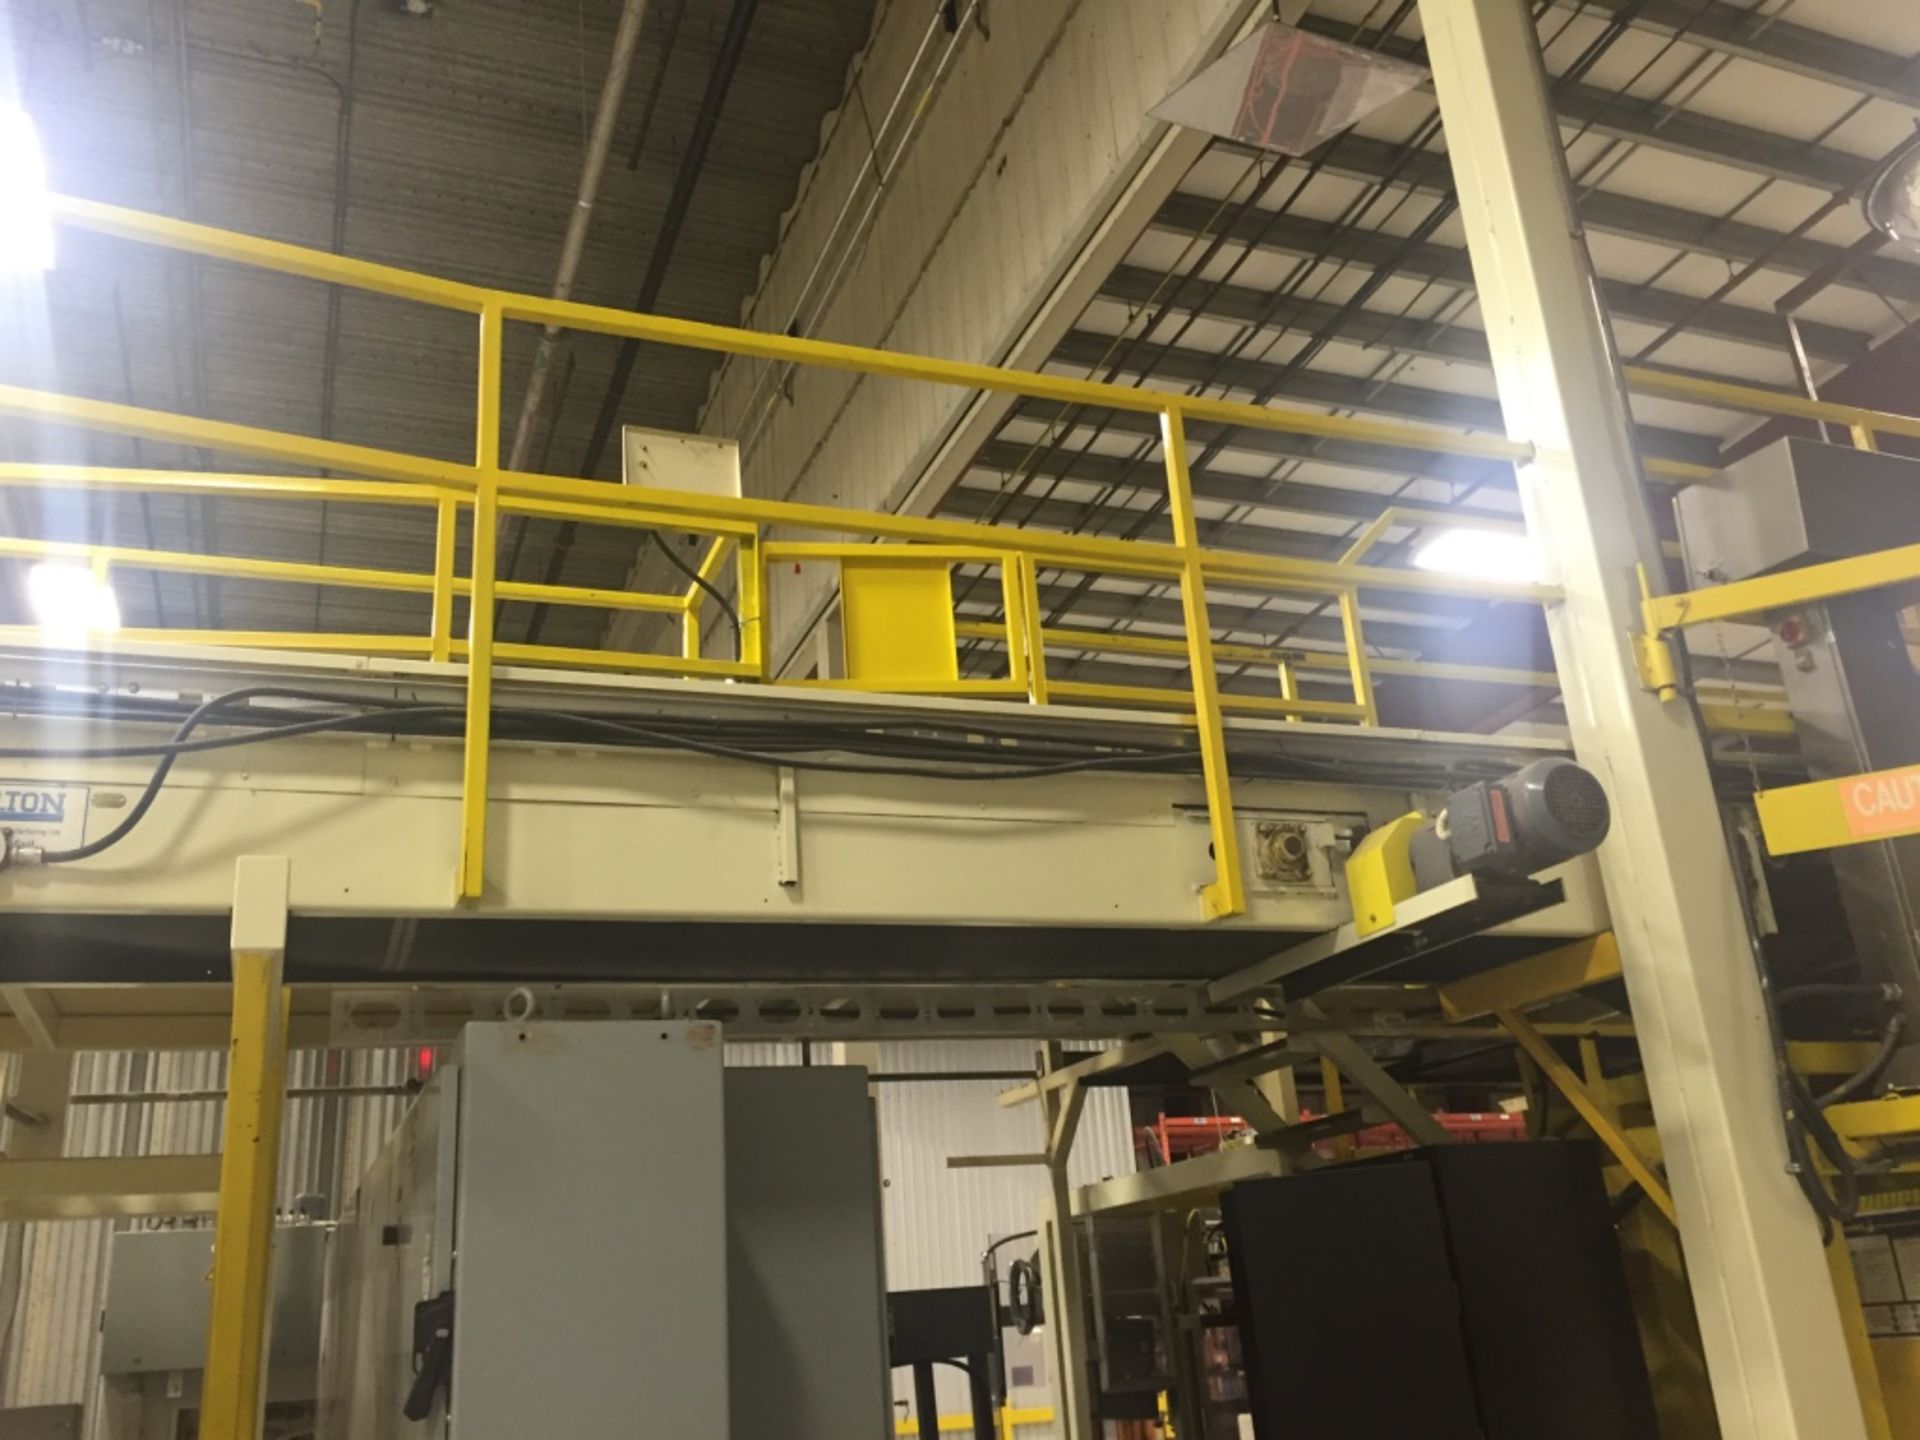 Incline Conveyor to Palletizer Includes Platforms - Image 3 of 3